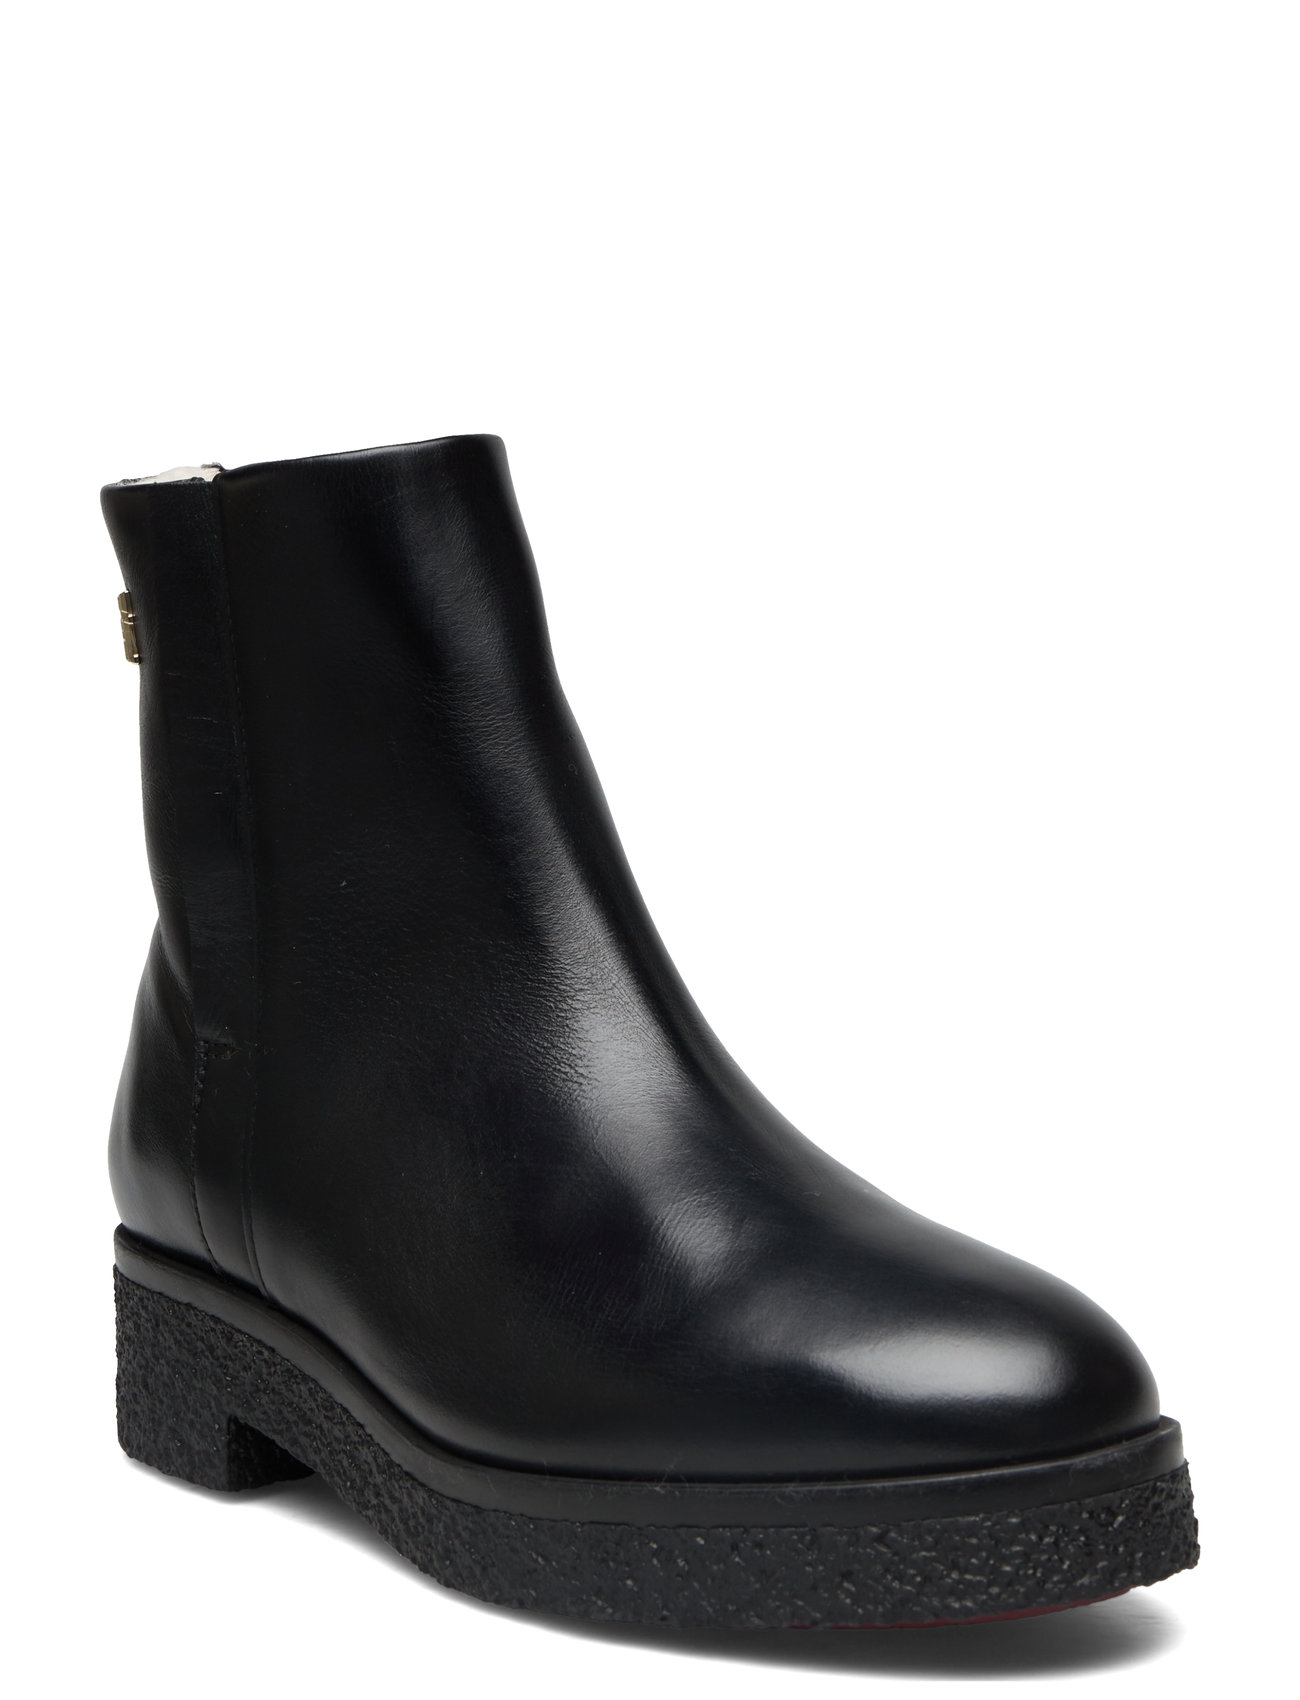 Crepe Look Ankle Boot Shoes Boots Ankle Boots Ankle Boots Flat Heel Black Tommy Hilfiger